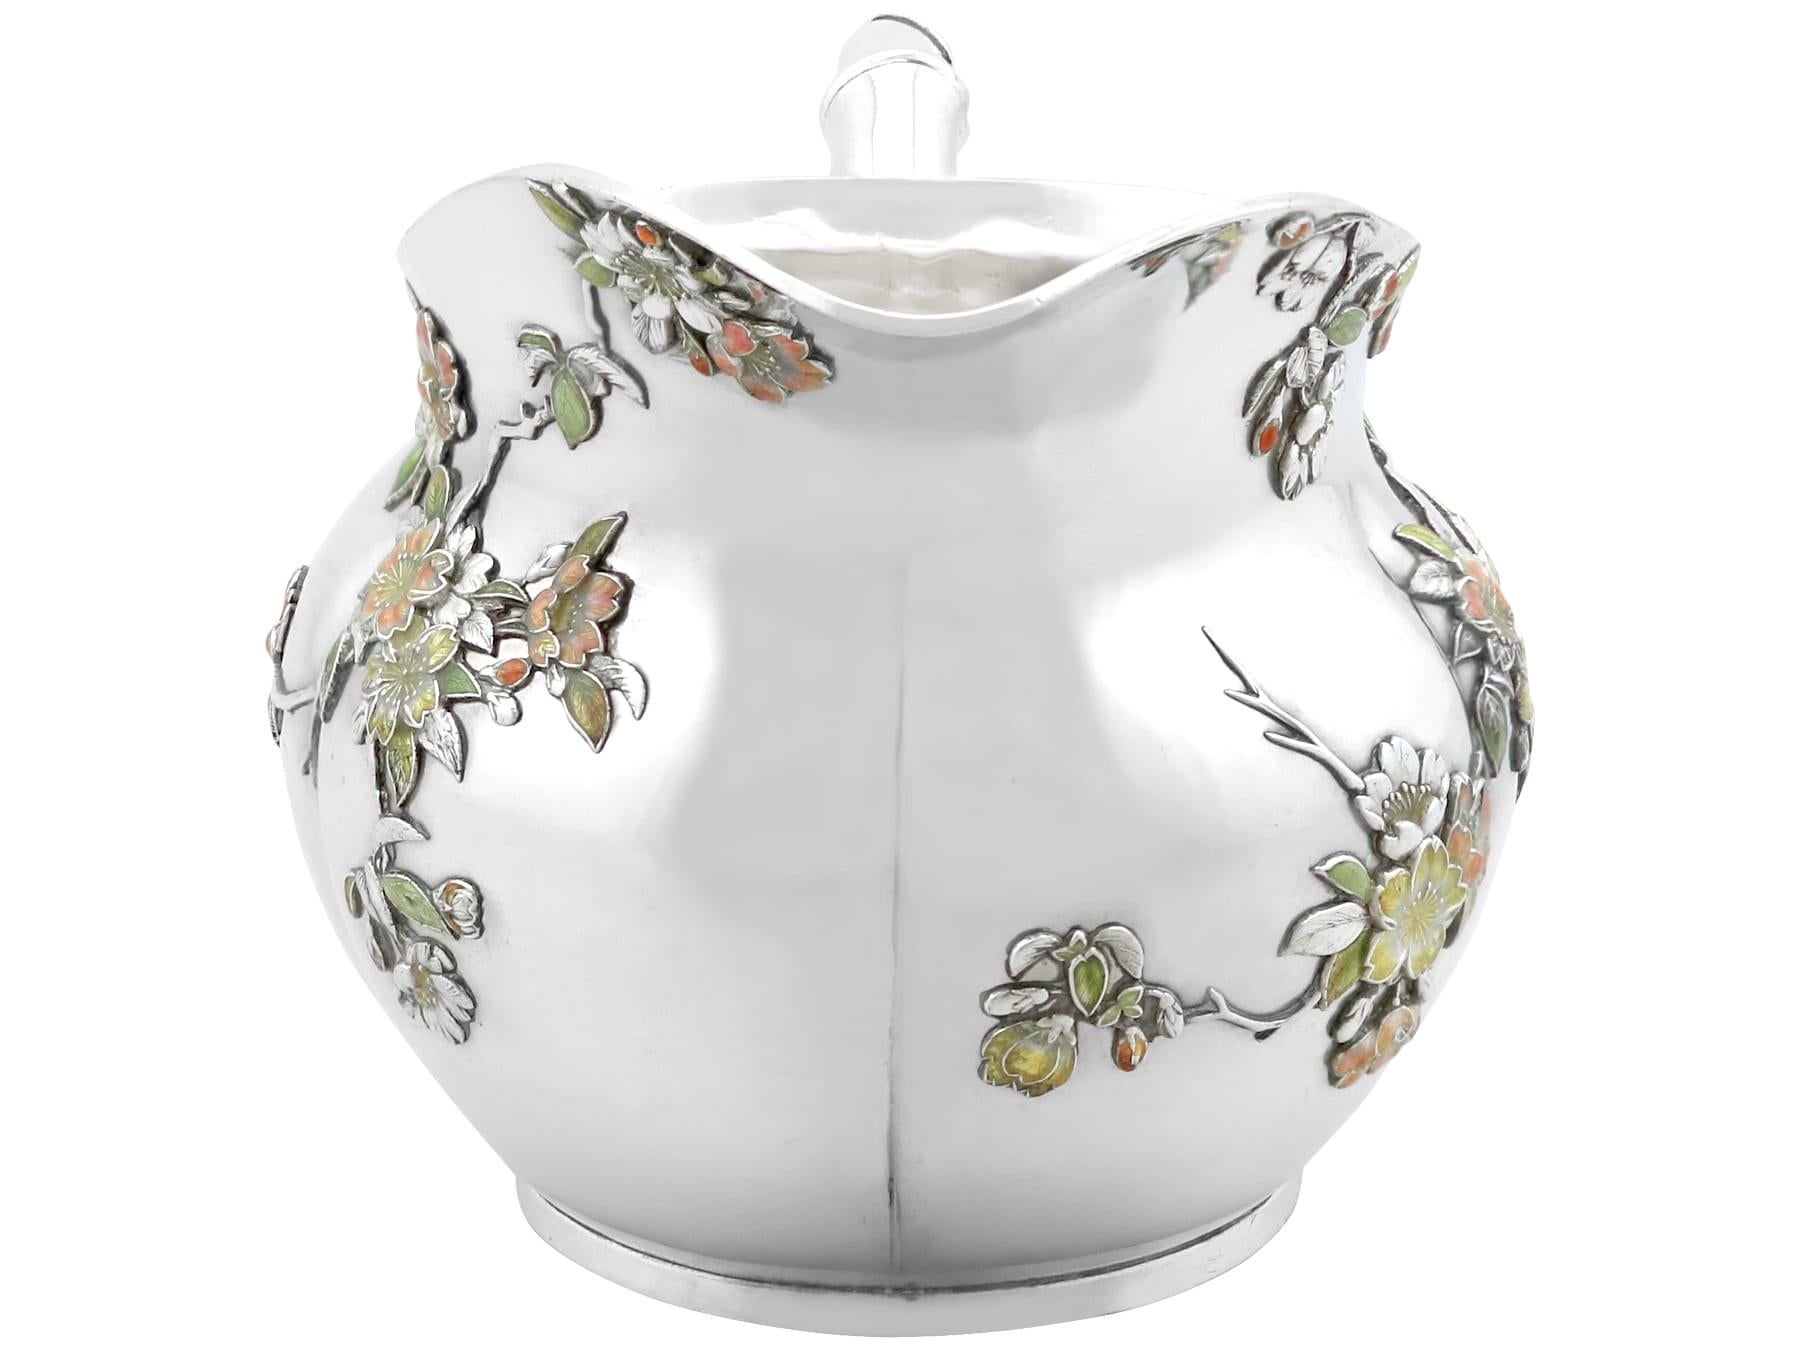 Antique Japanese Silver and Enamel Cream Jug and Sugar Bowl Circa 1890 For Sale 4